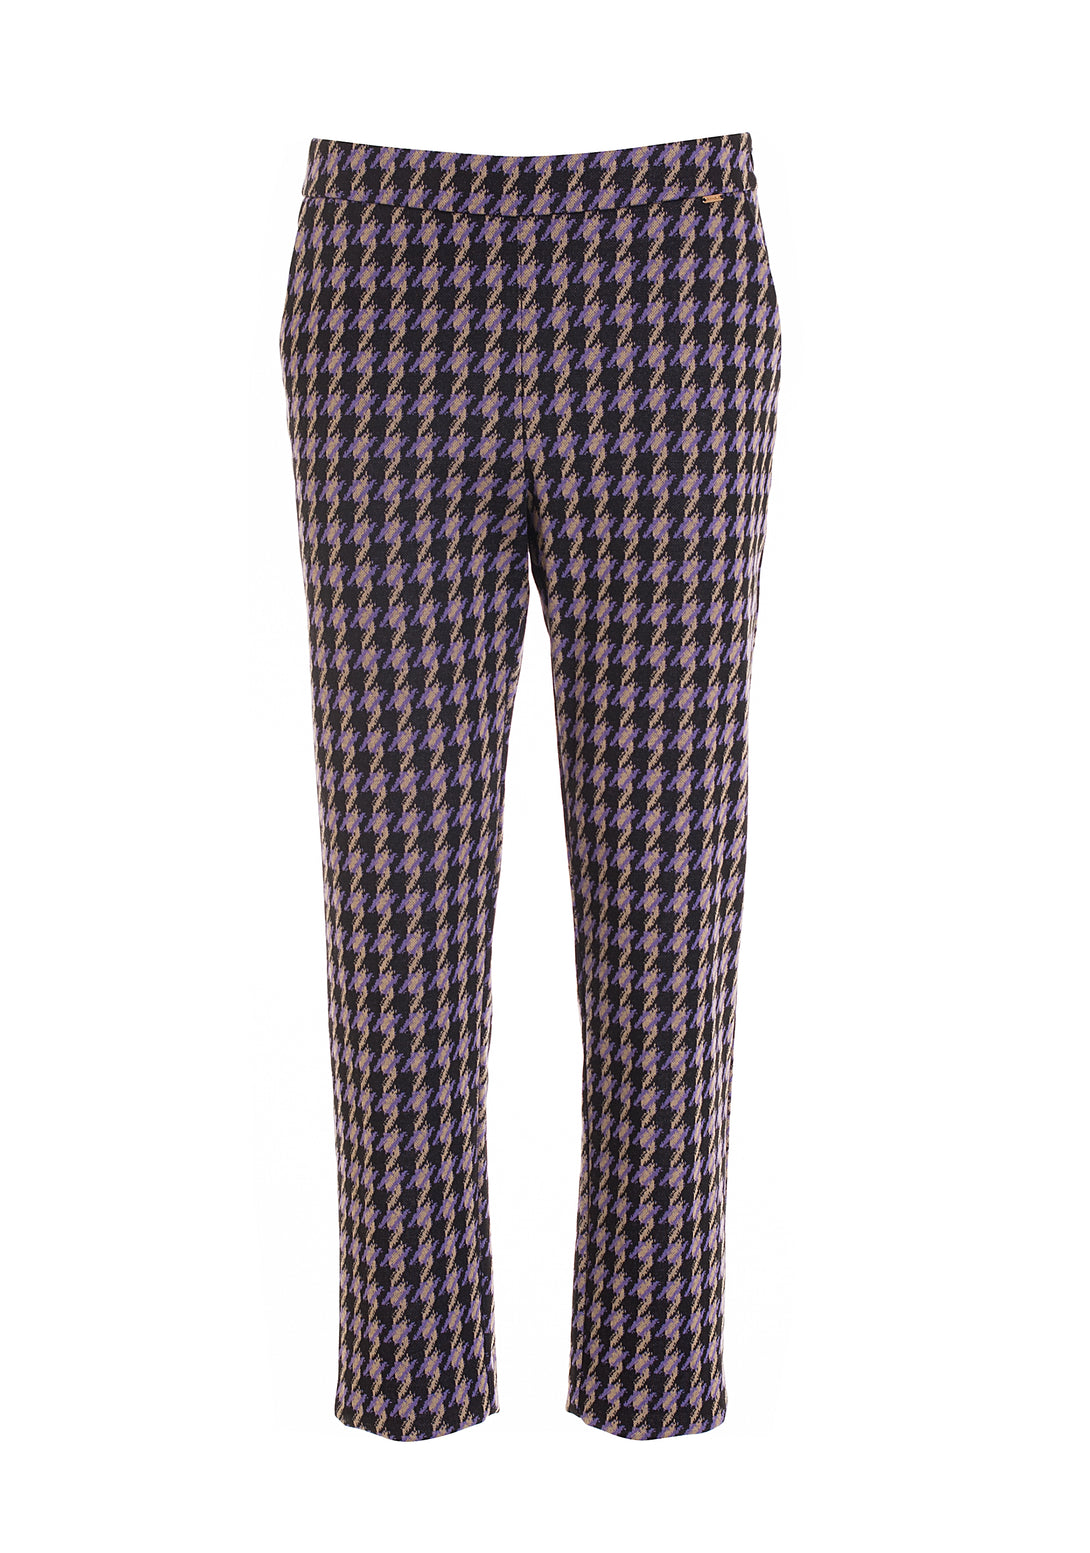 Chinos pant regular fit with pied de poule pattern